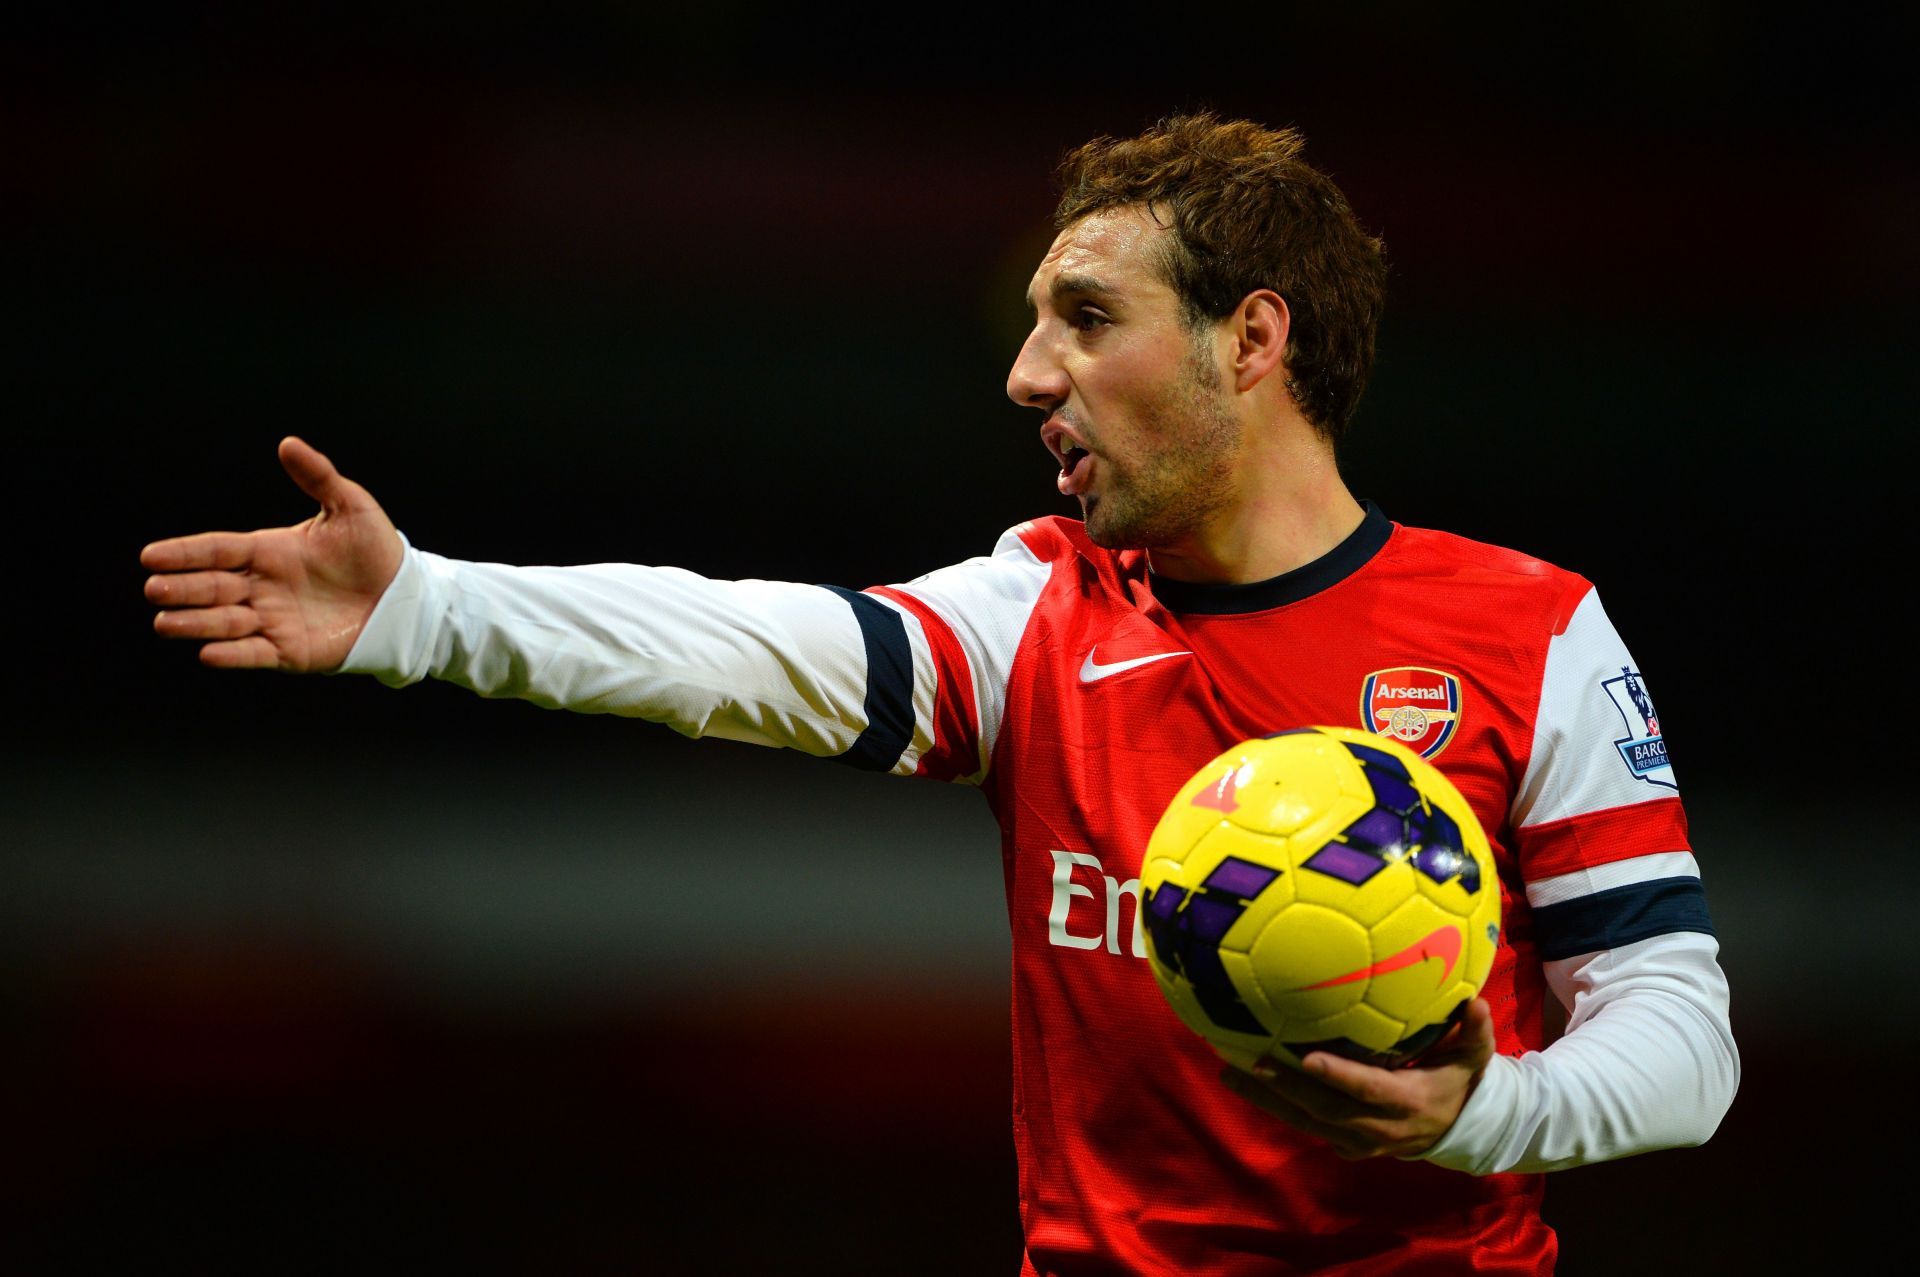 Cazorla does not feature on the list but is one of the most famous short players around